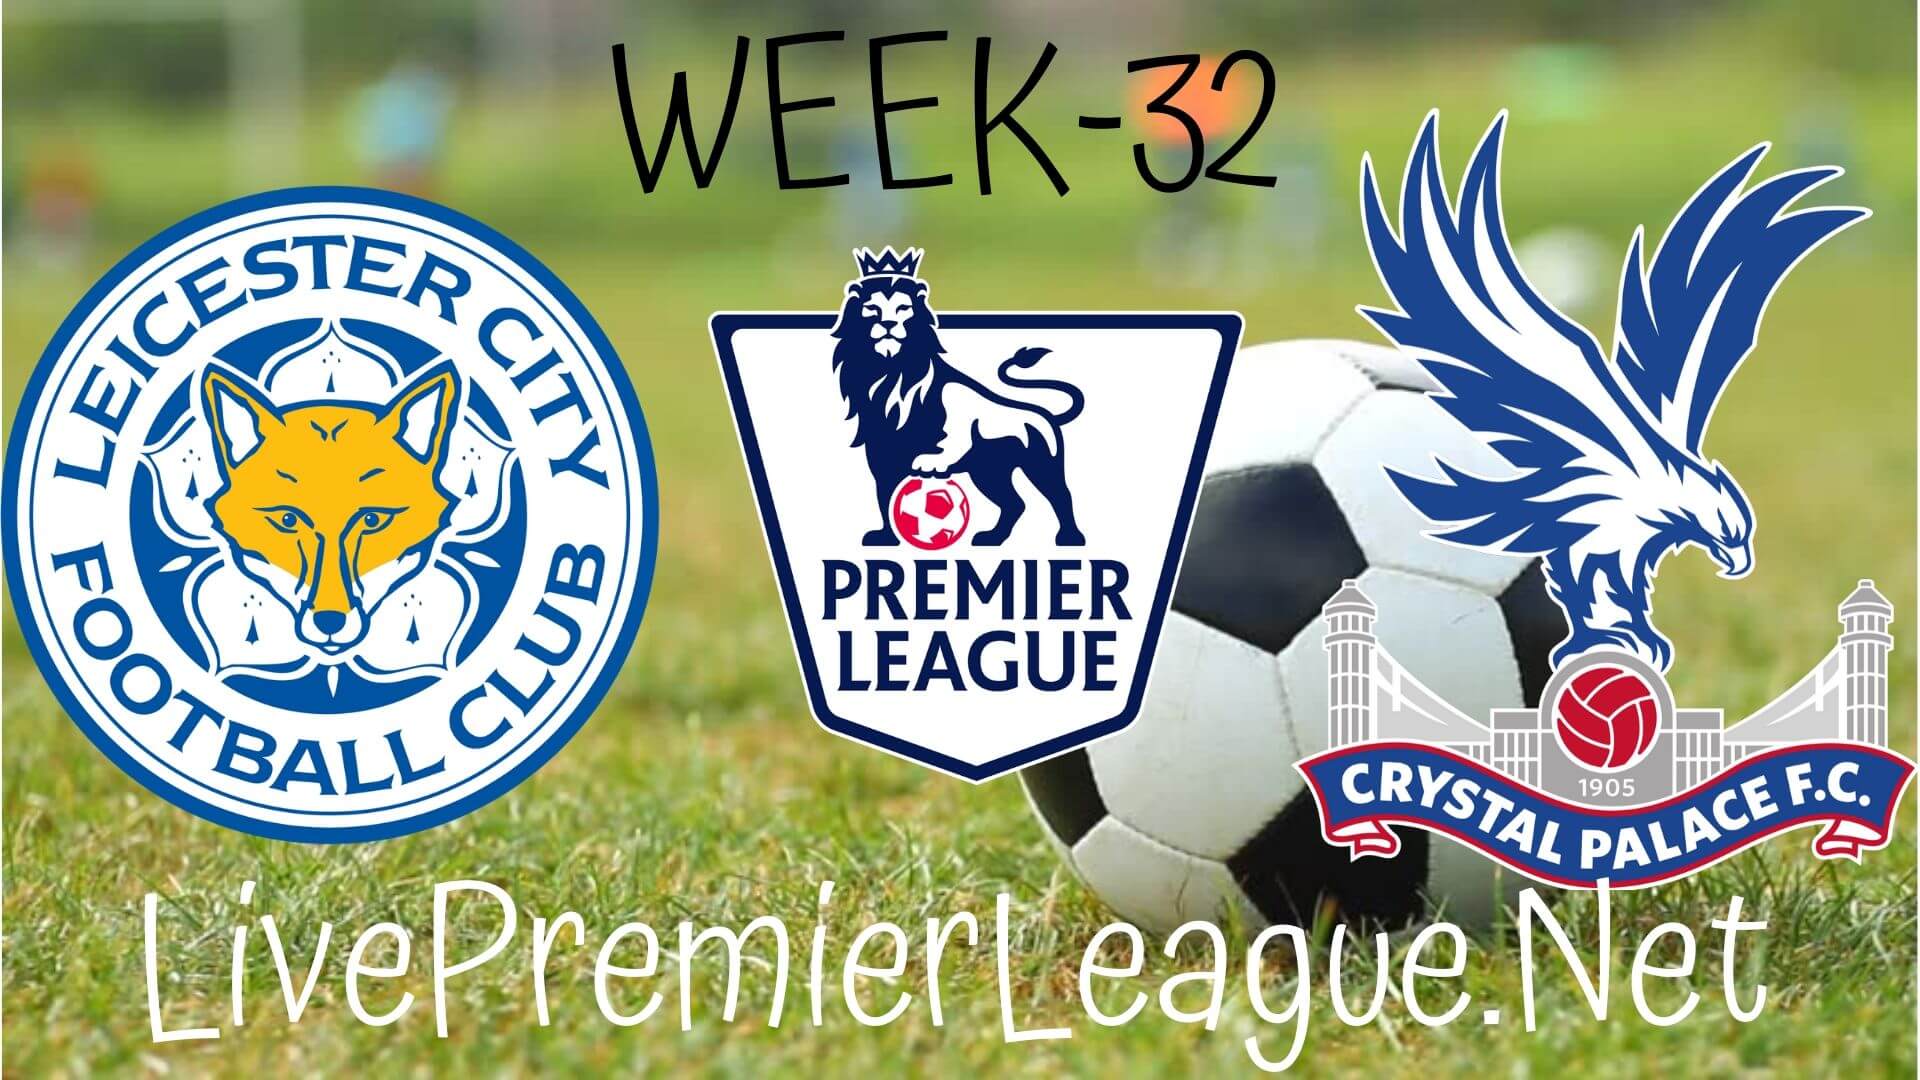 Leicester City vs Crystal Palace Live Stream | EPL Week 33